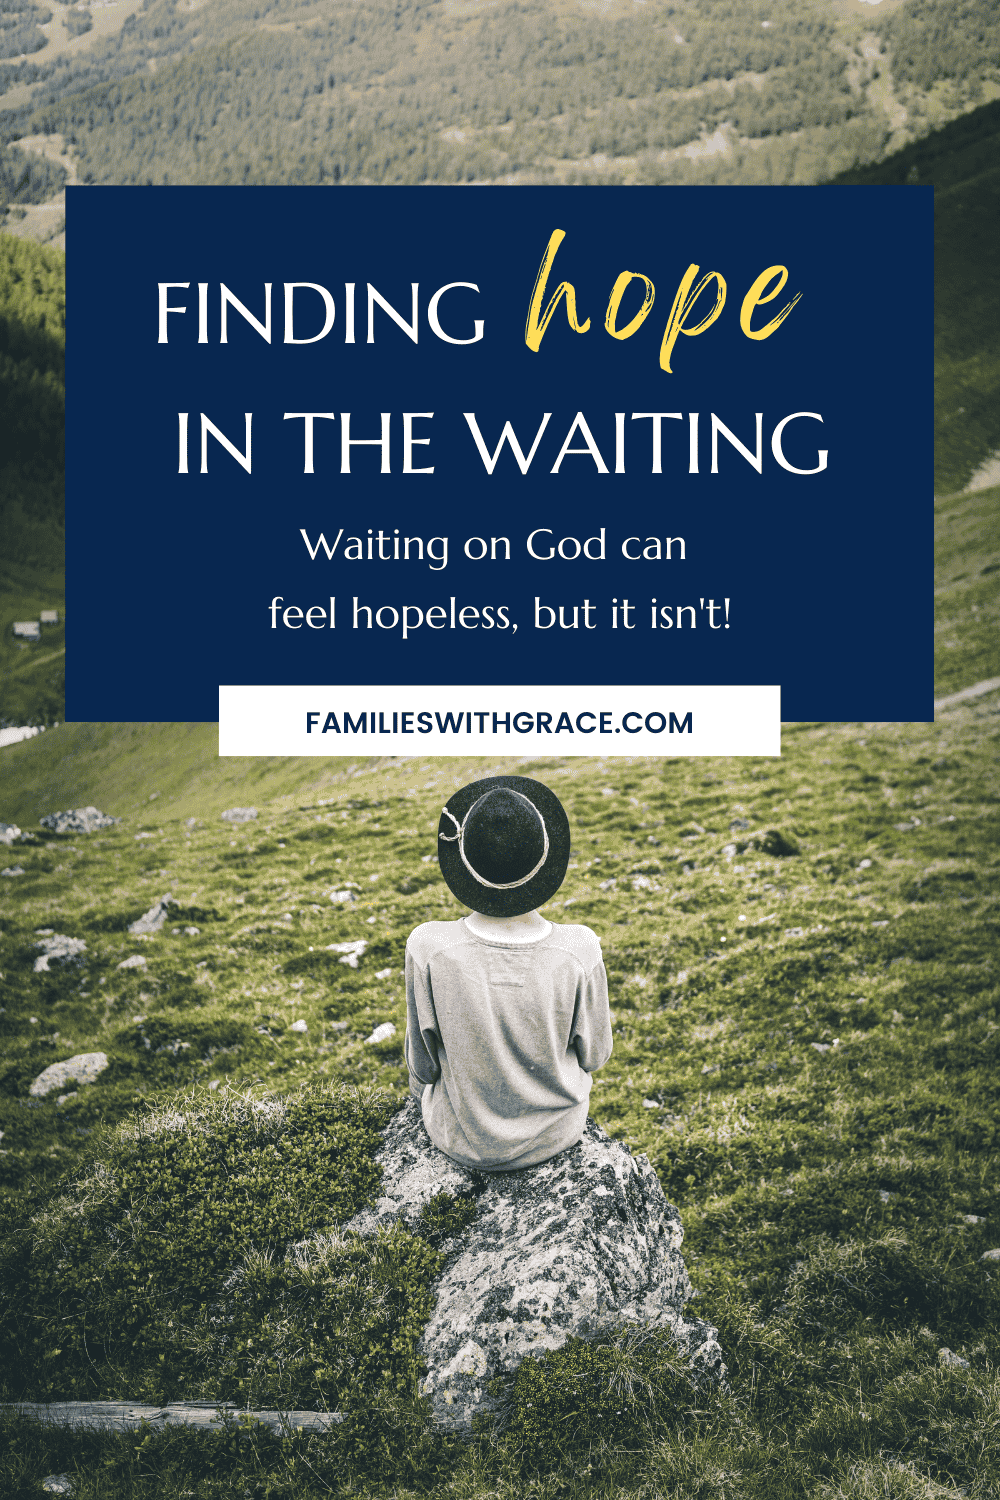 Finding hope in the waiting